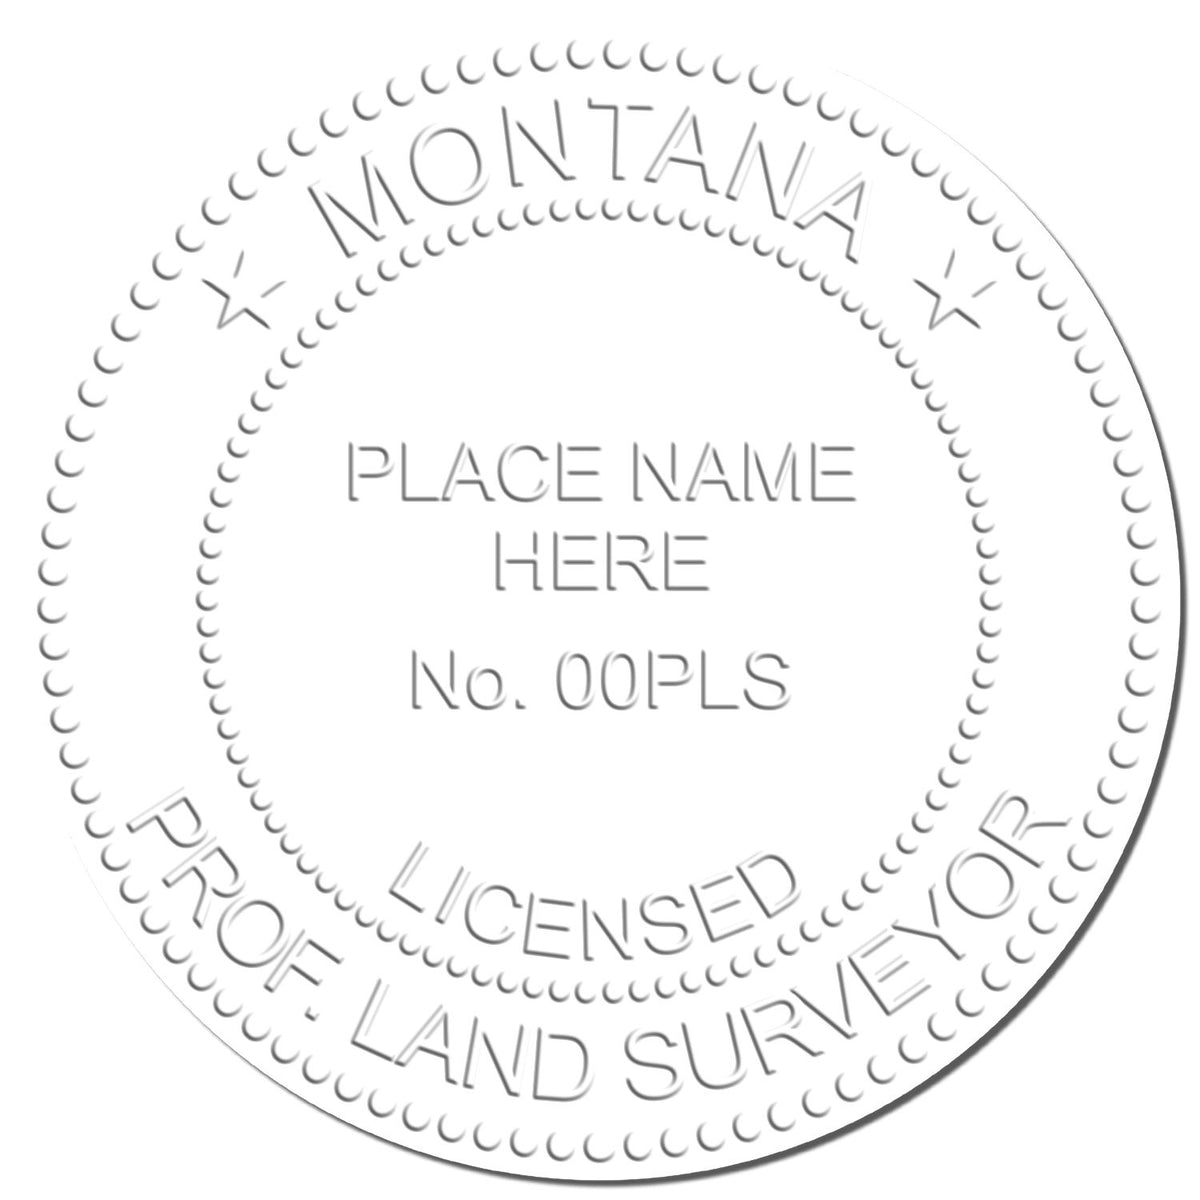 This paper is stamped with a sample imprint of the Long Reach Montana Land Surveyor Seal, signifying its quality and reliability.